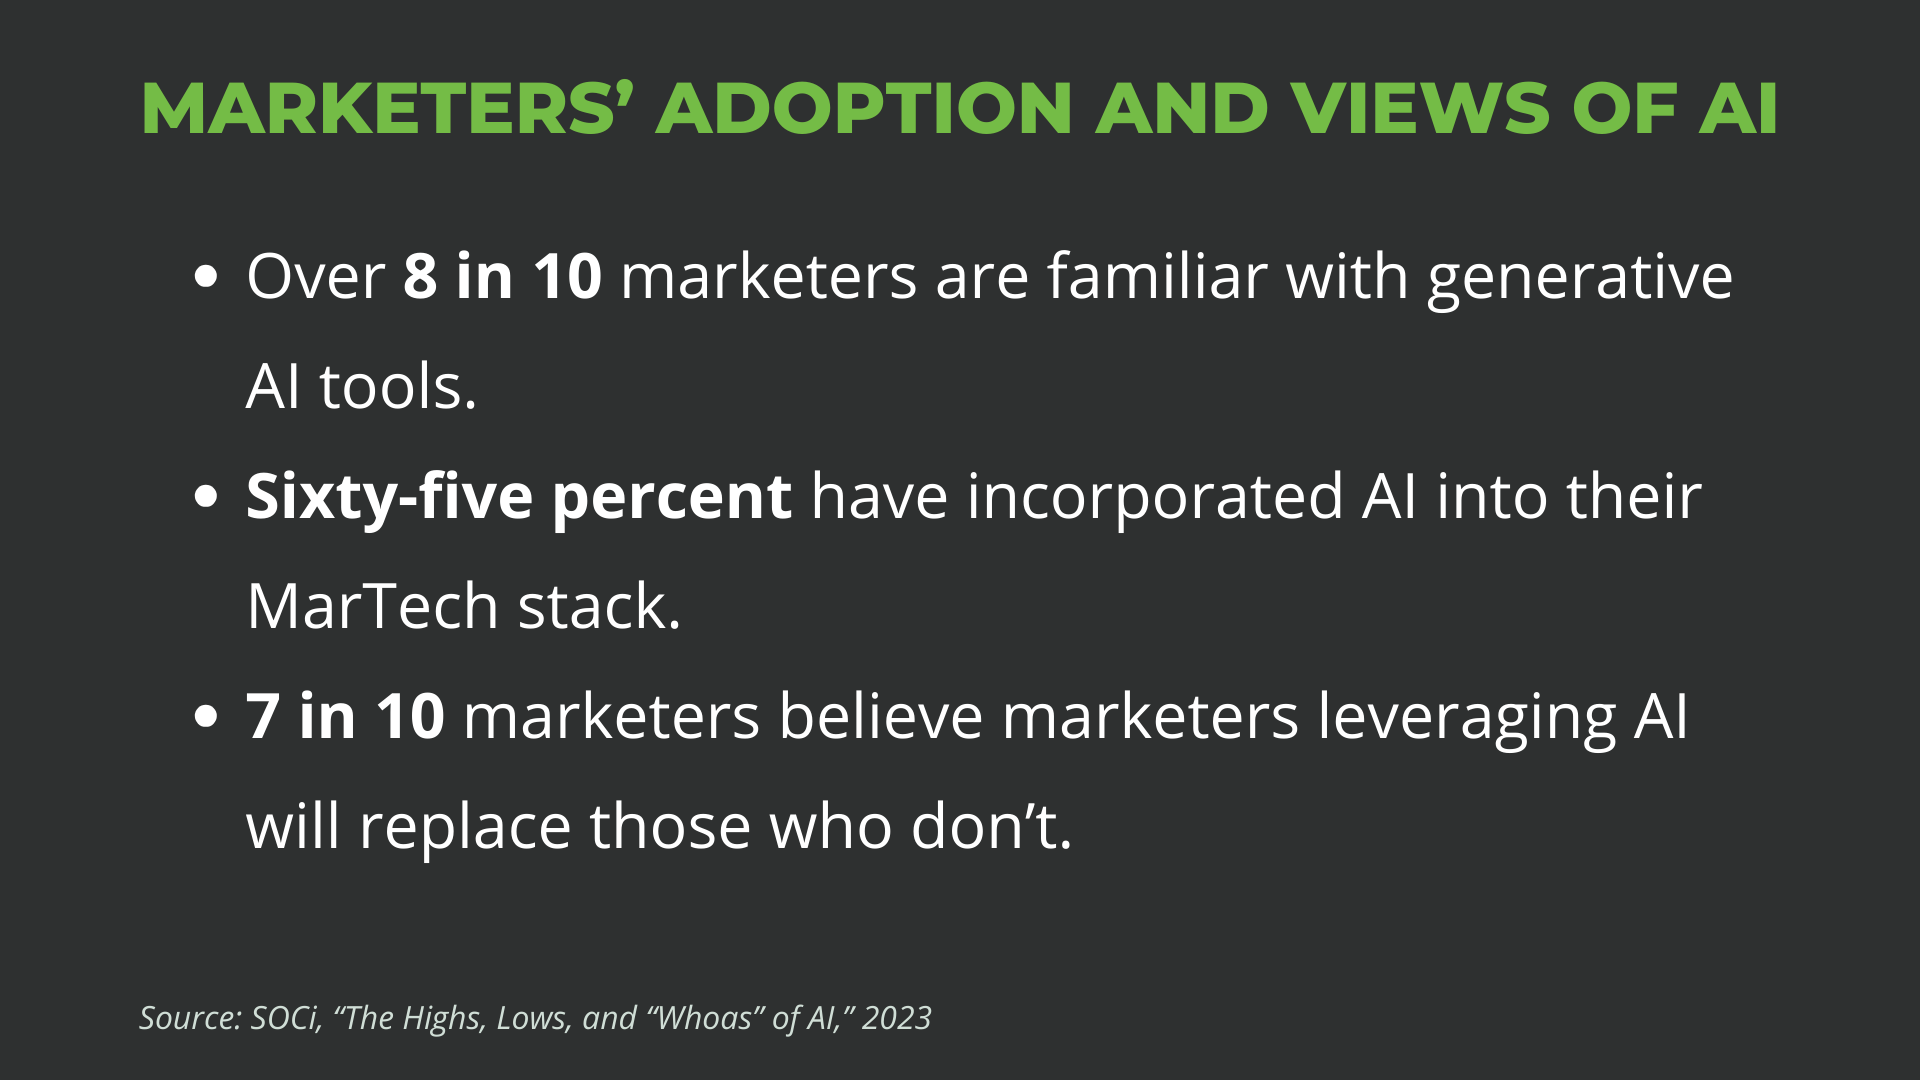 Green heading and white bullet point text showcasing the what marketers think about AI and their adoption rates.